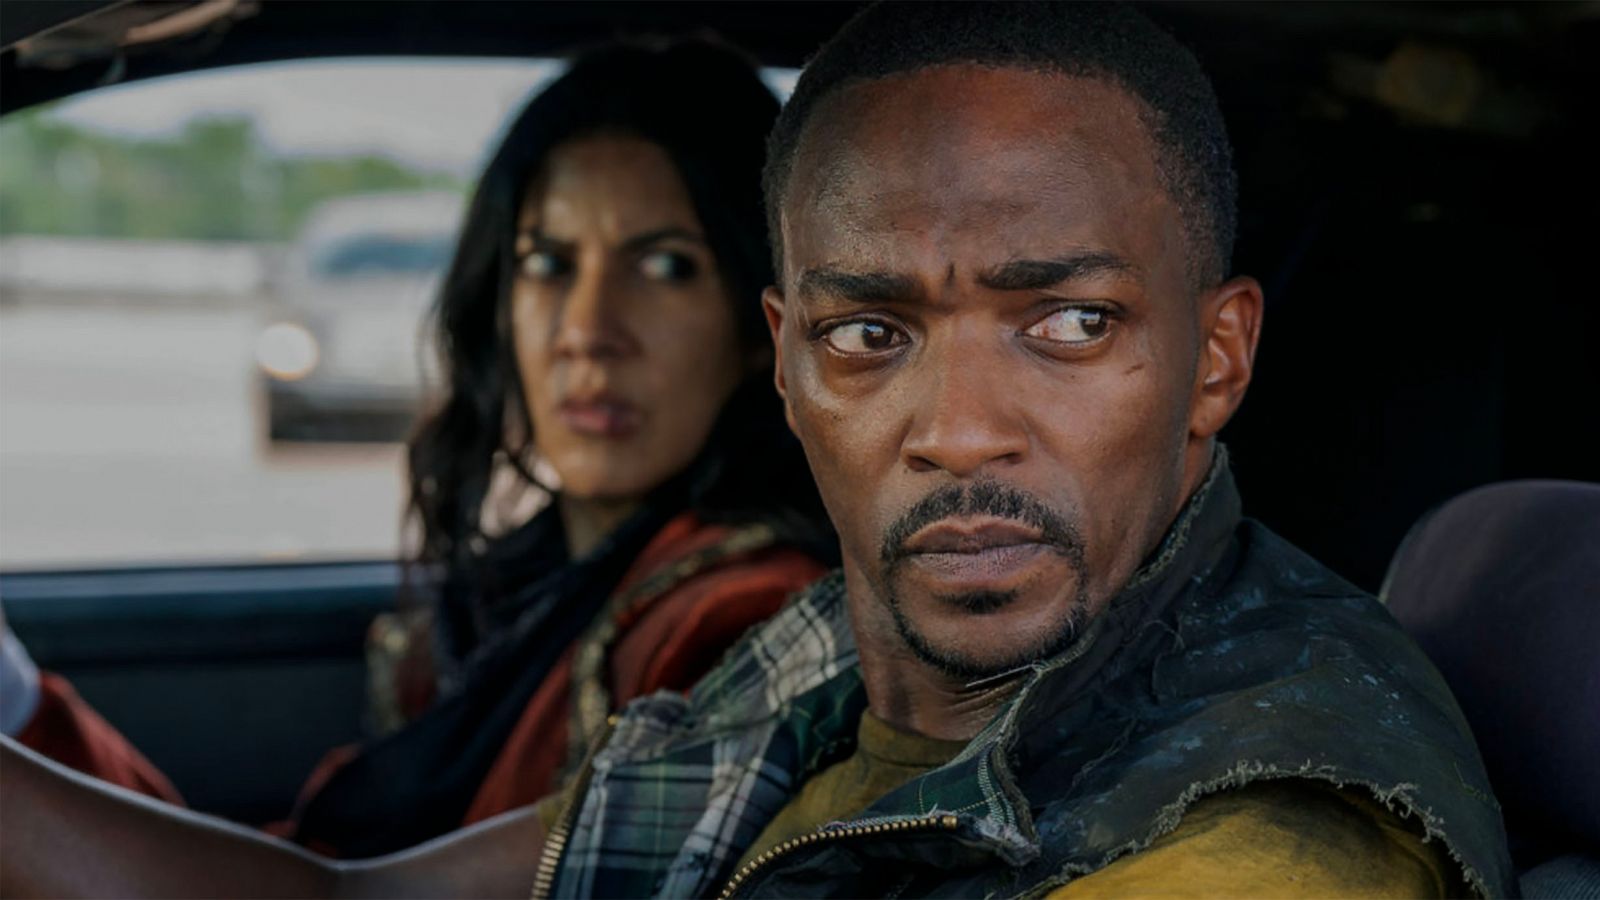 Twisted Metal Full Series in HD Leaked on Torrent Sites & Telegram Channels  for Free Download and Watch Online; Anthony Mackie's Show Is the Latest  Victim of Piracy?